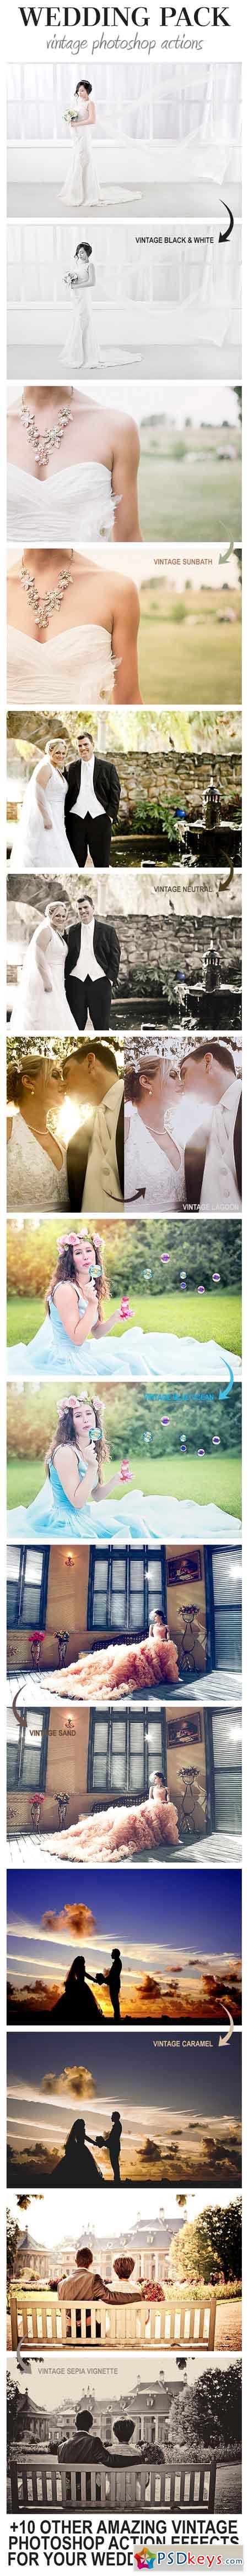 Wedding Pack - Vintage Photoshop Actions 19702270